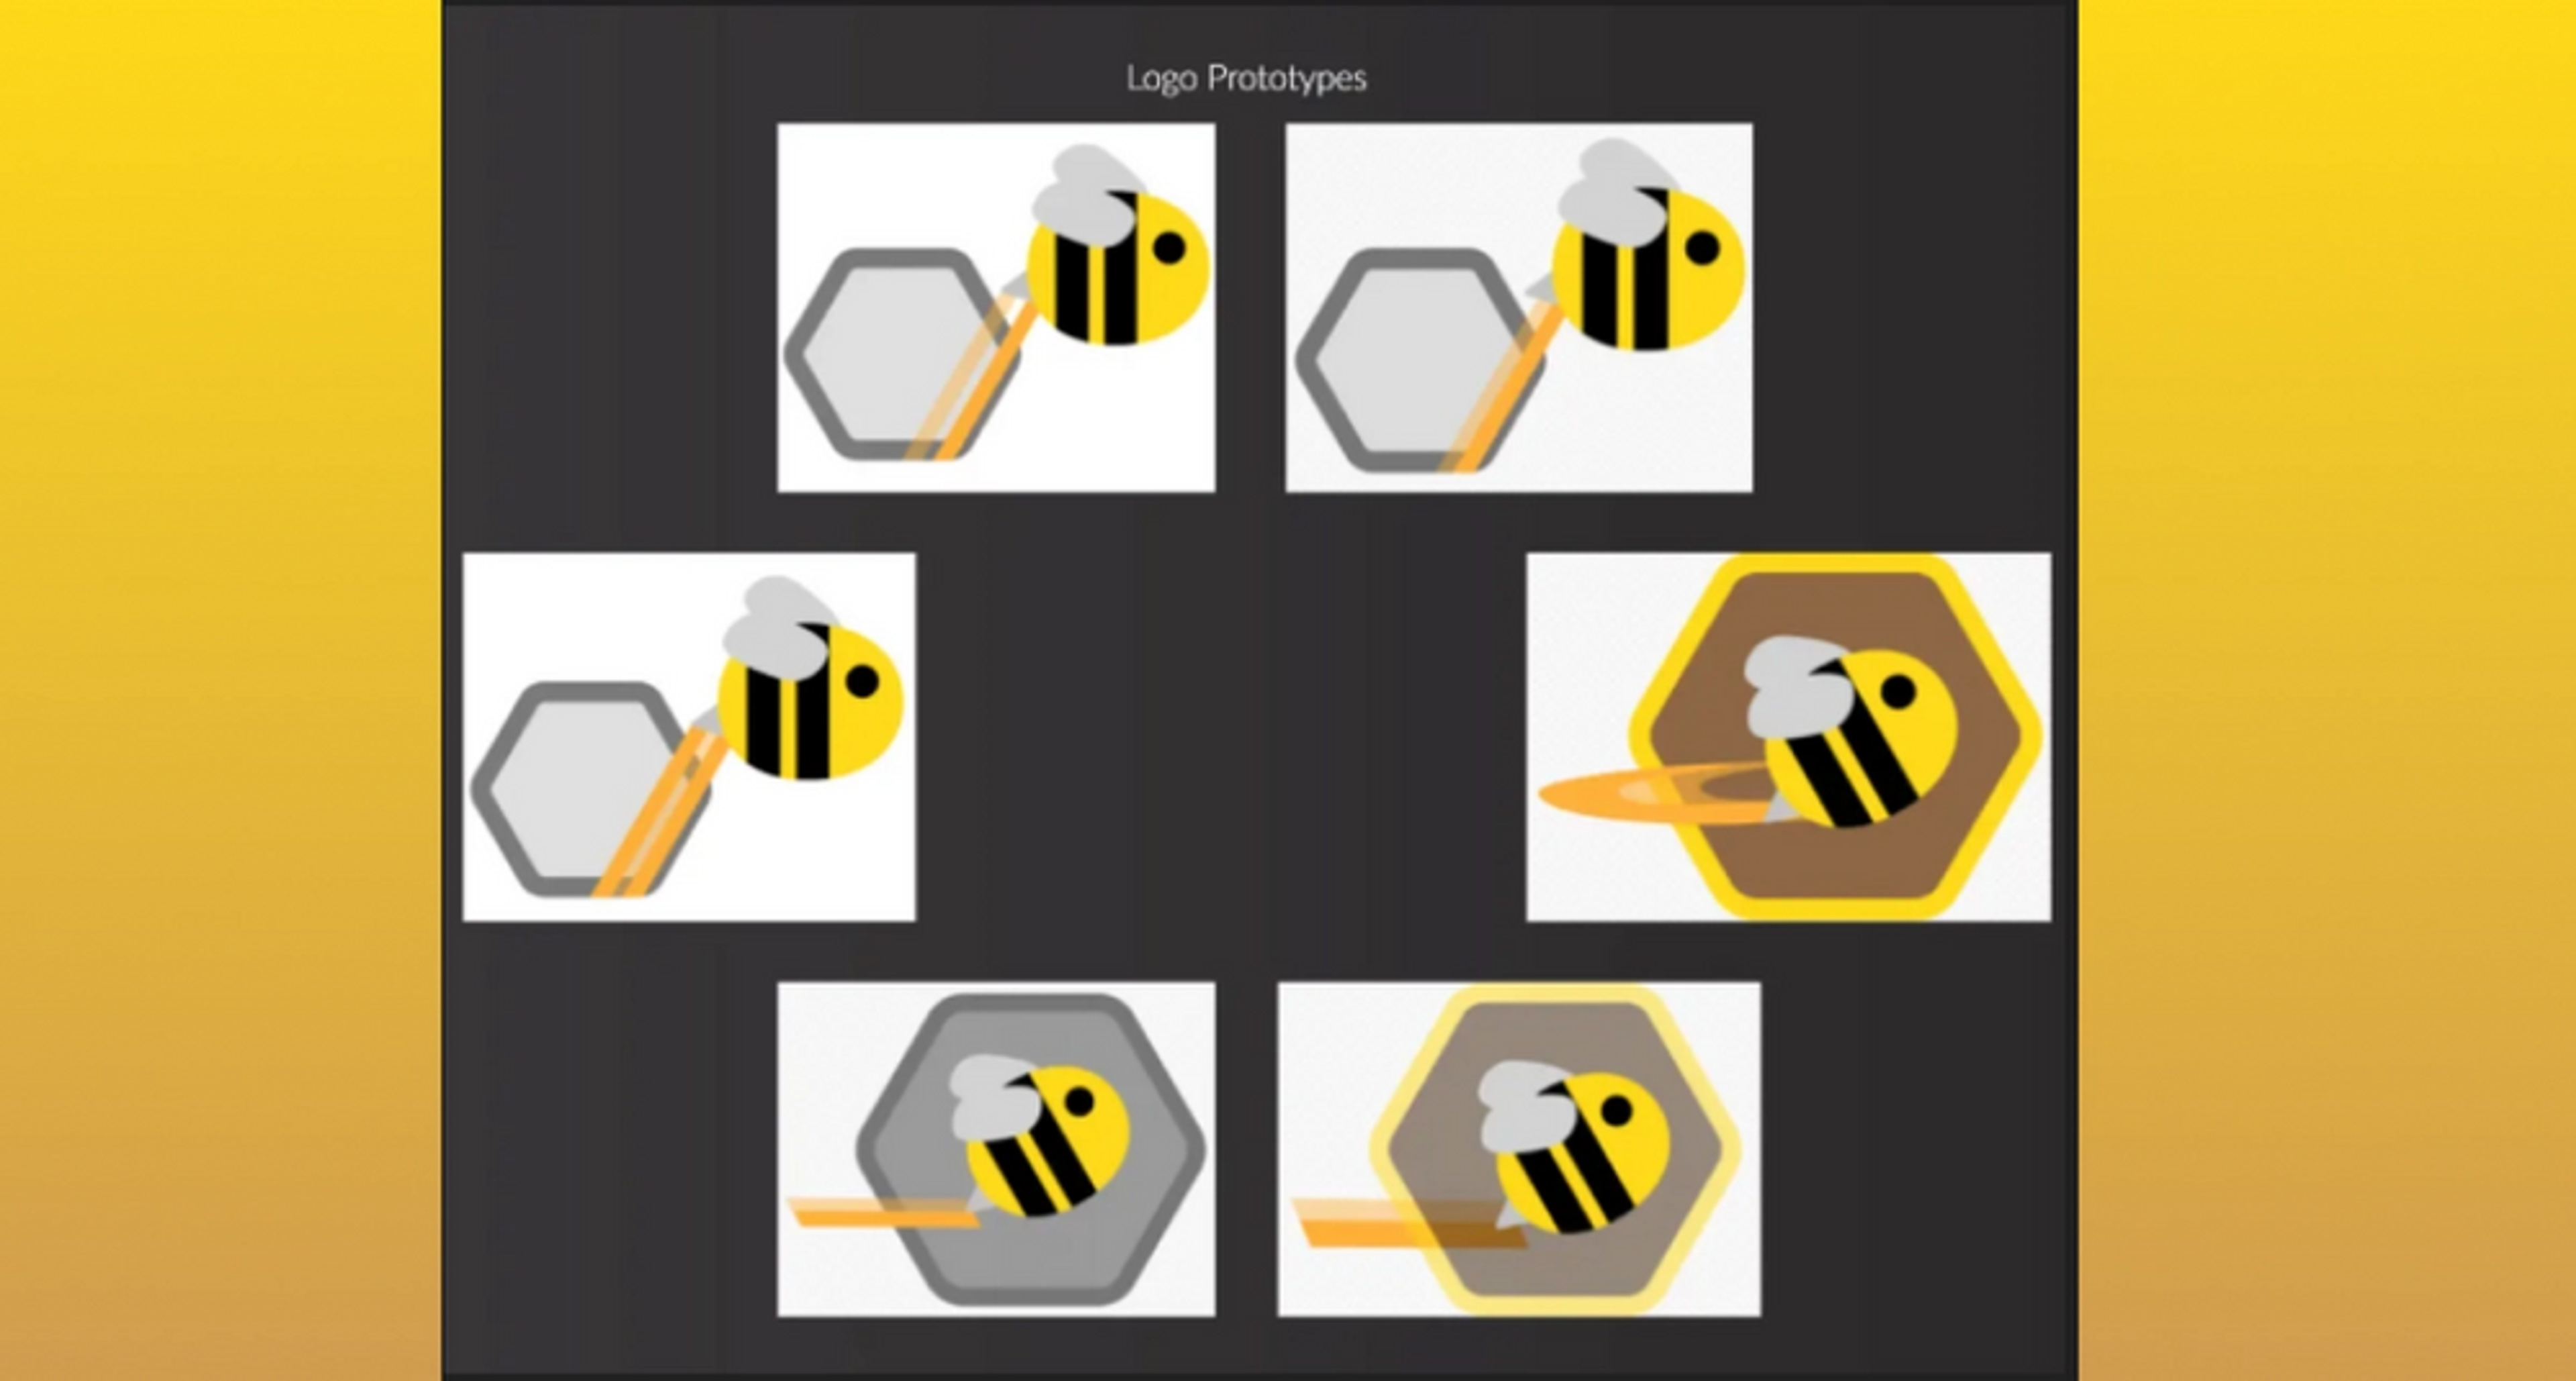 Various different Logos for the Scribee branding all themed around the bee